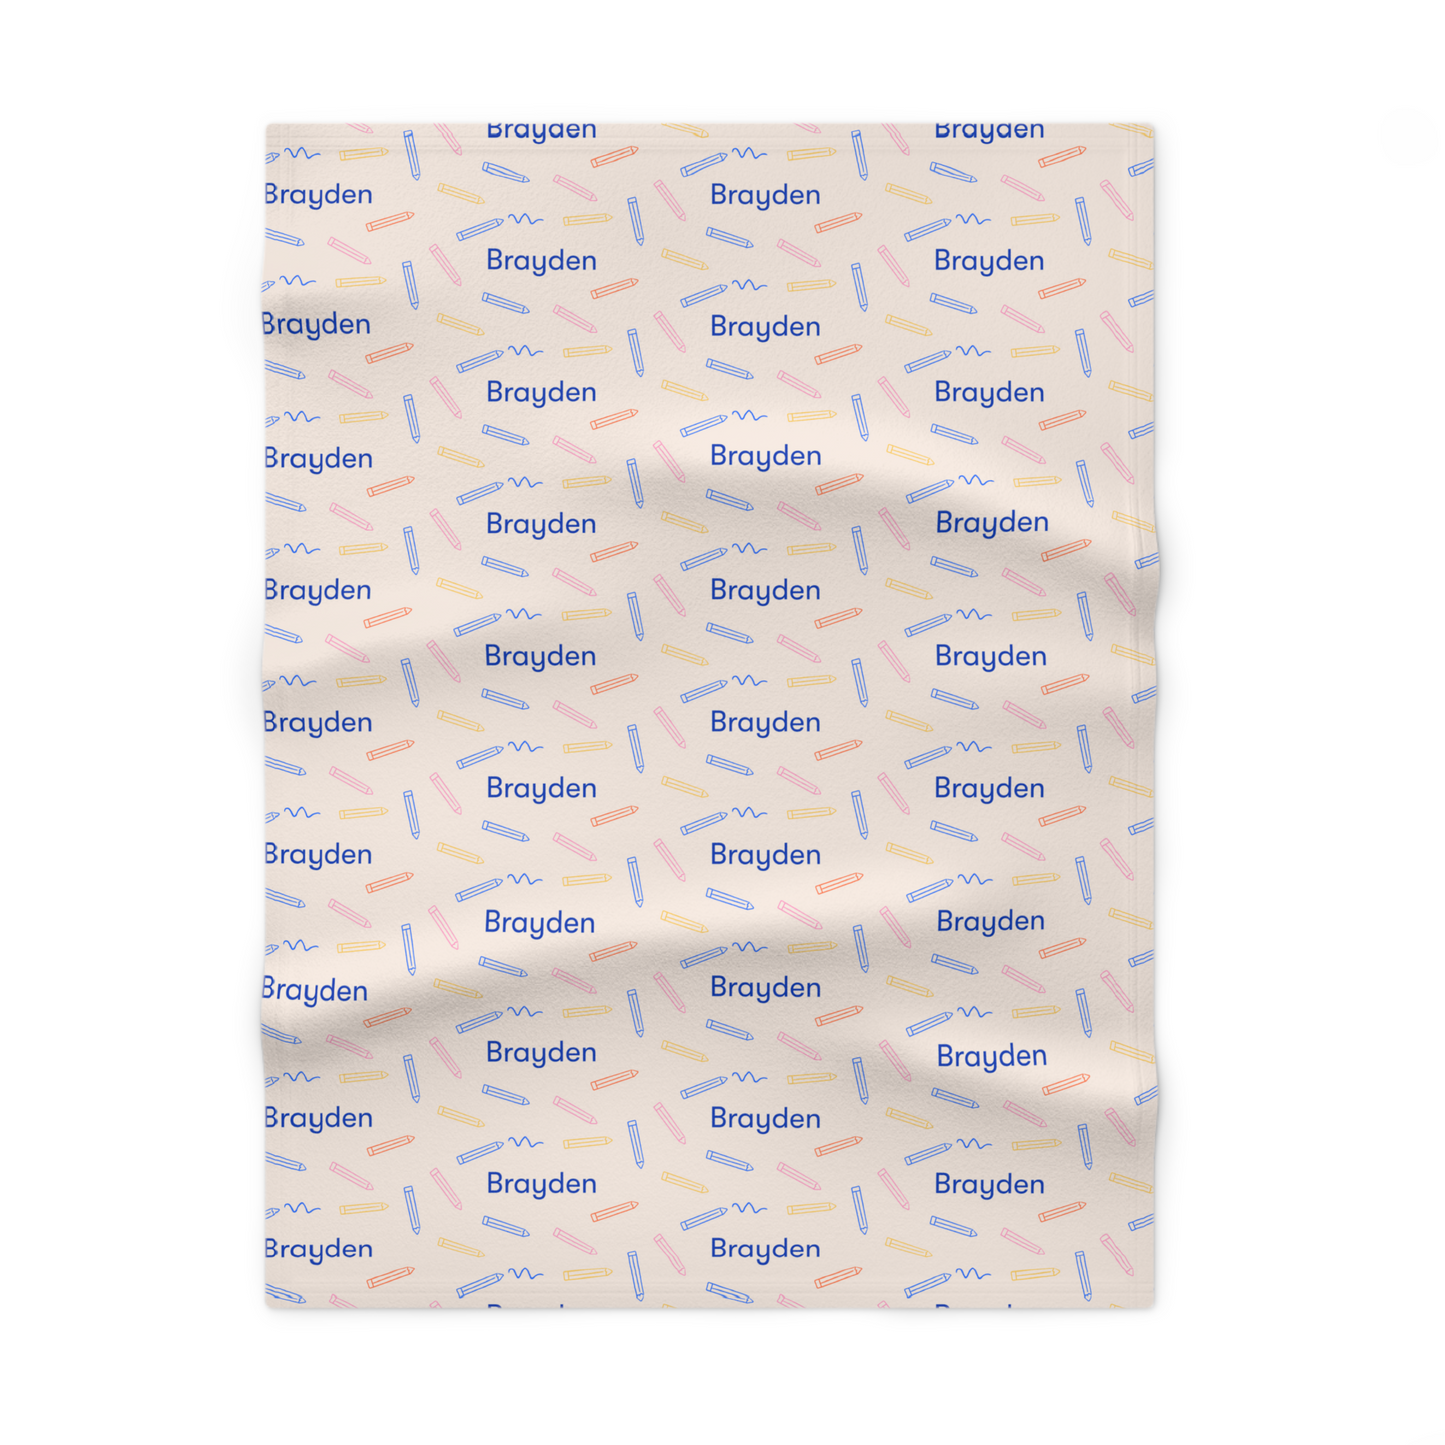 Fleece personalized baby blanket in colored pencil pattern laid flat